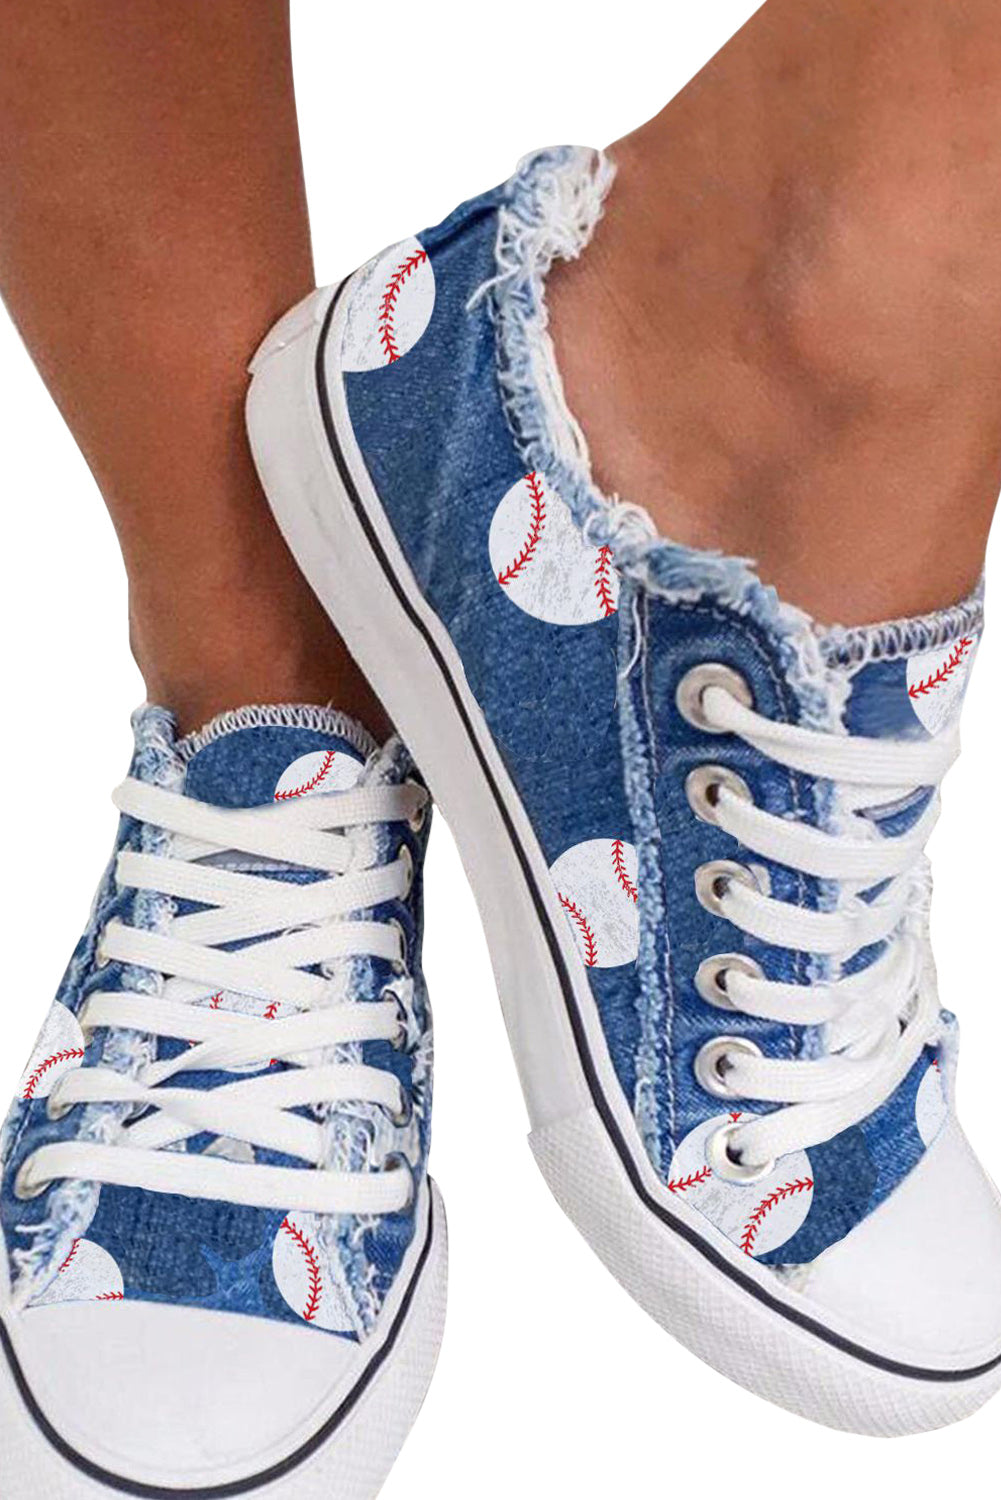 Sky Blue Casual Baseball Print Lacing Up Sneakers Women's Shoes JT's Designer Fashion